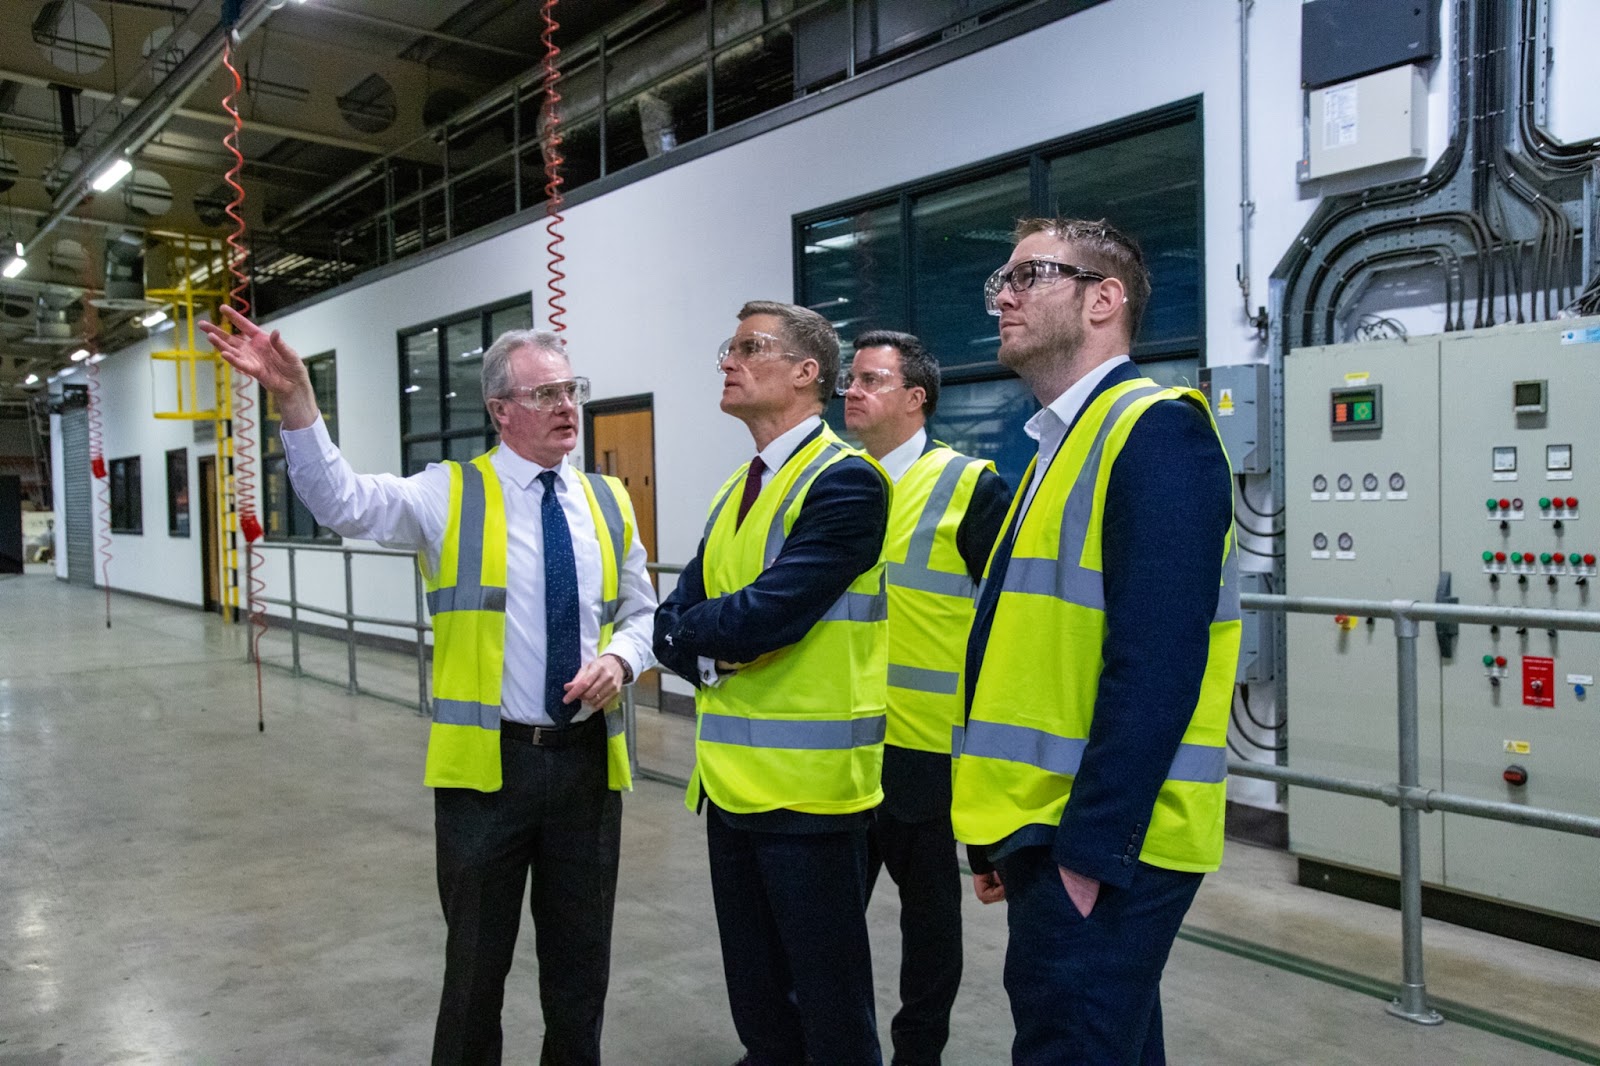 Secretary of State for Transport visits Wrightbus